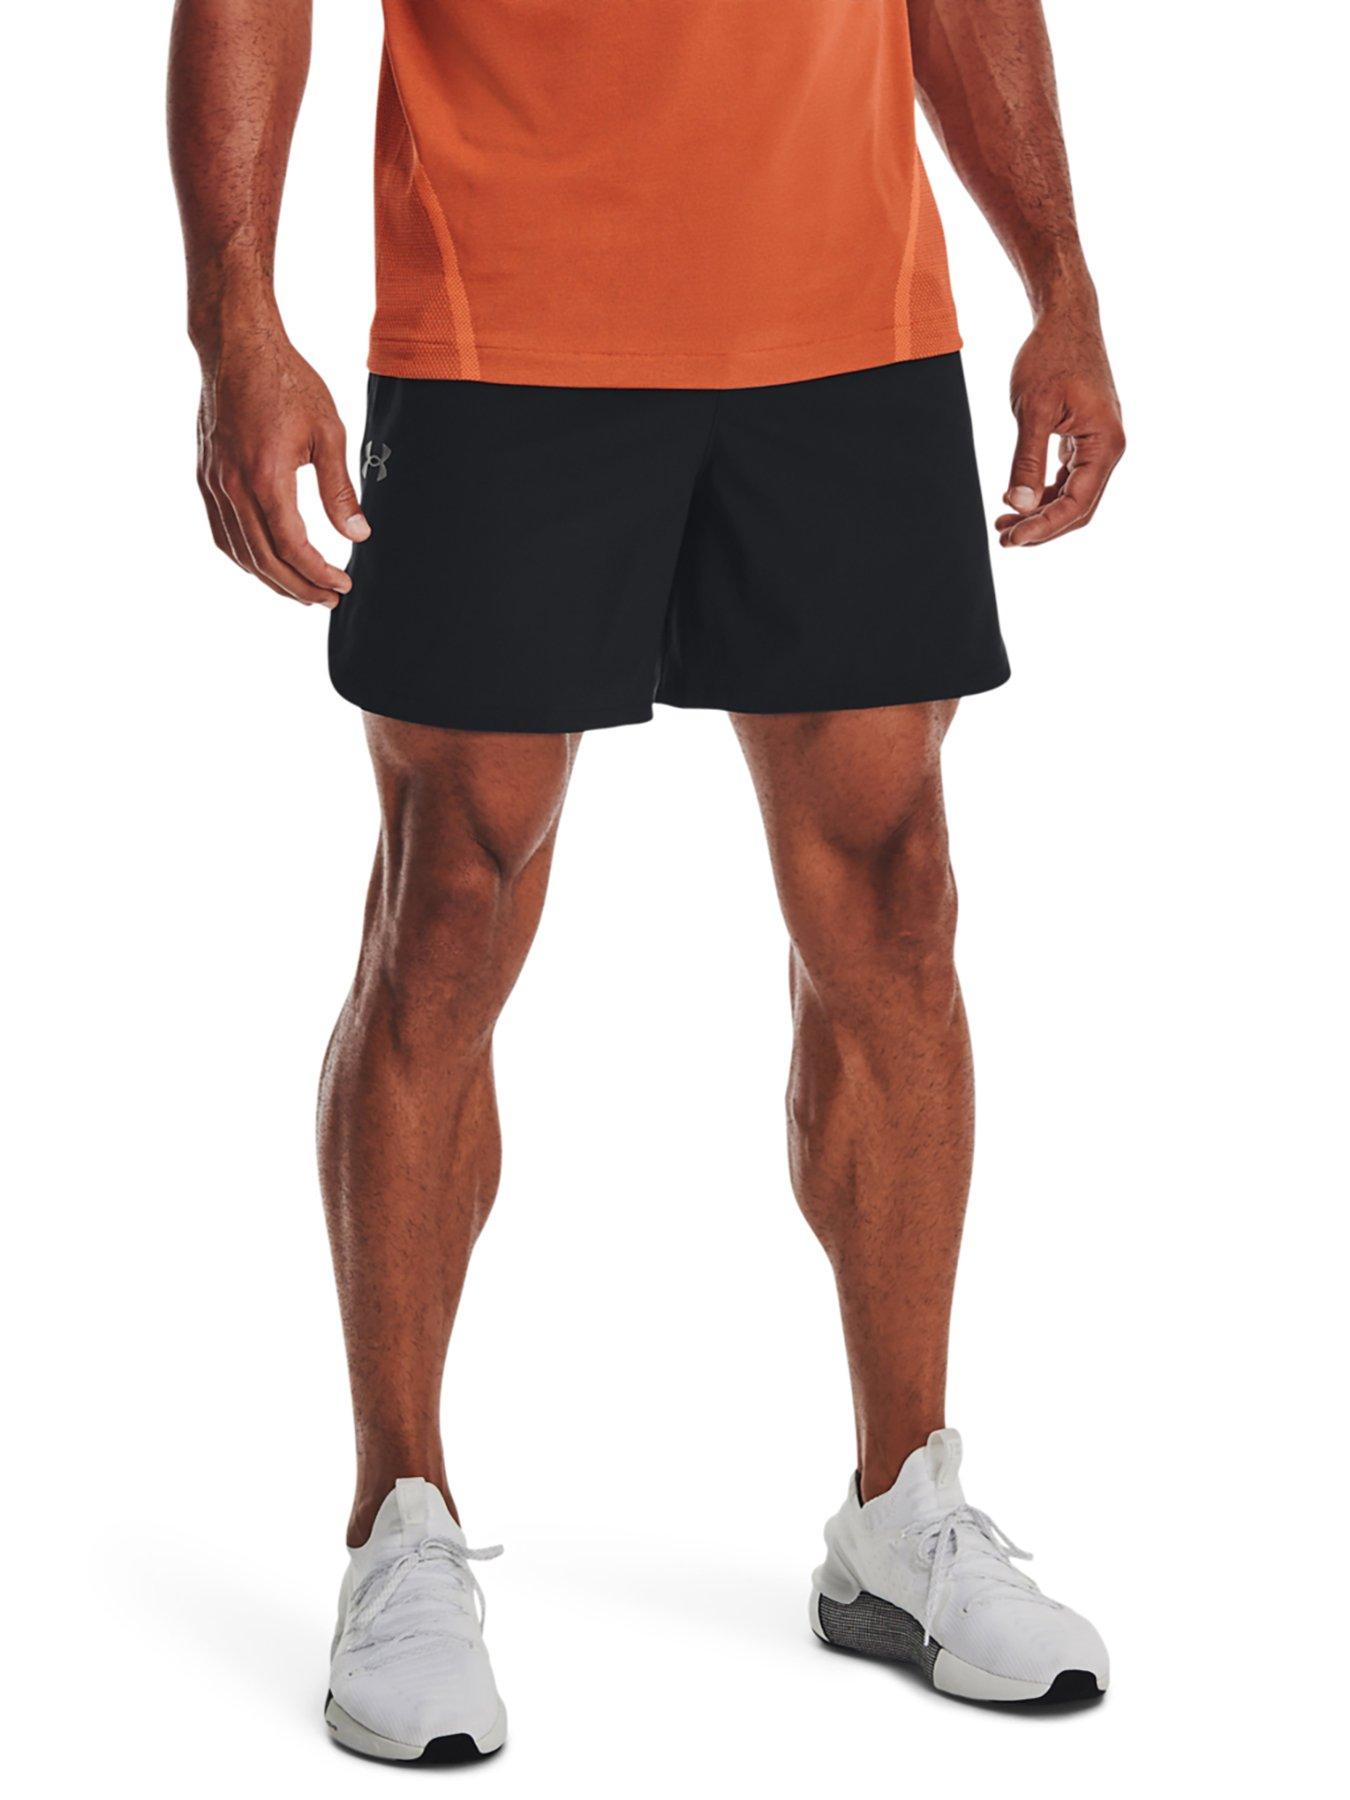 Under Armour - Mens Unstoppable Cargo Shorts